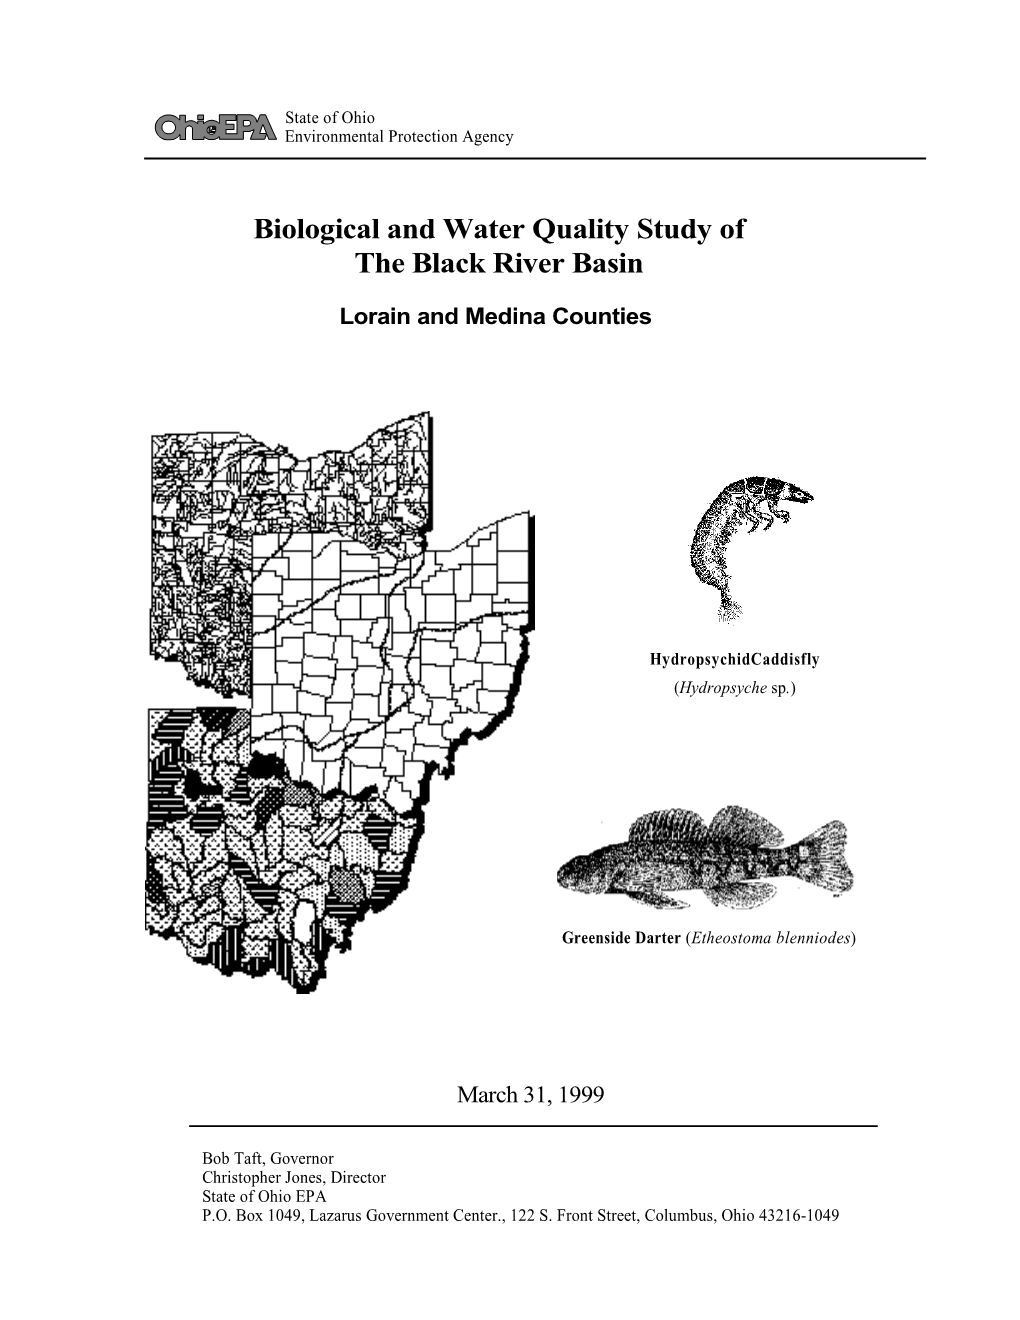 Biological and Water Quality Study of the Black River Basin